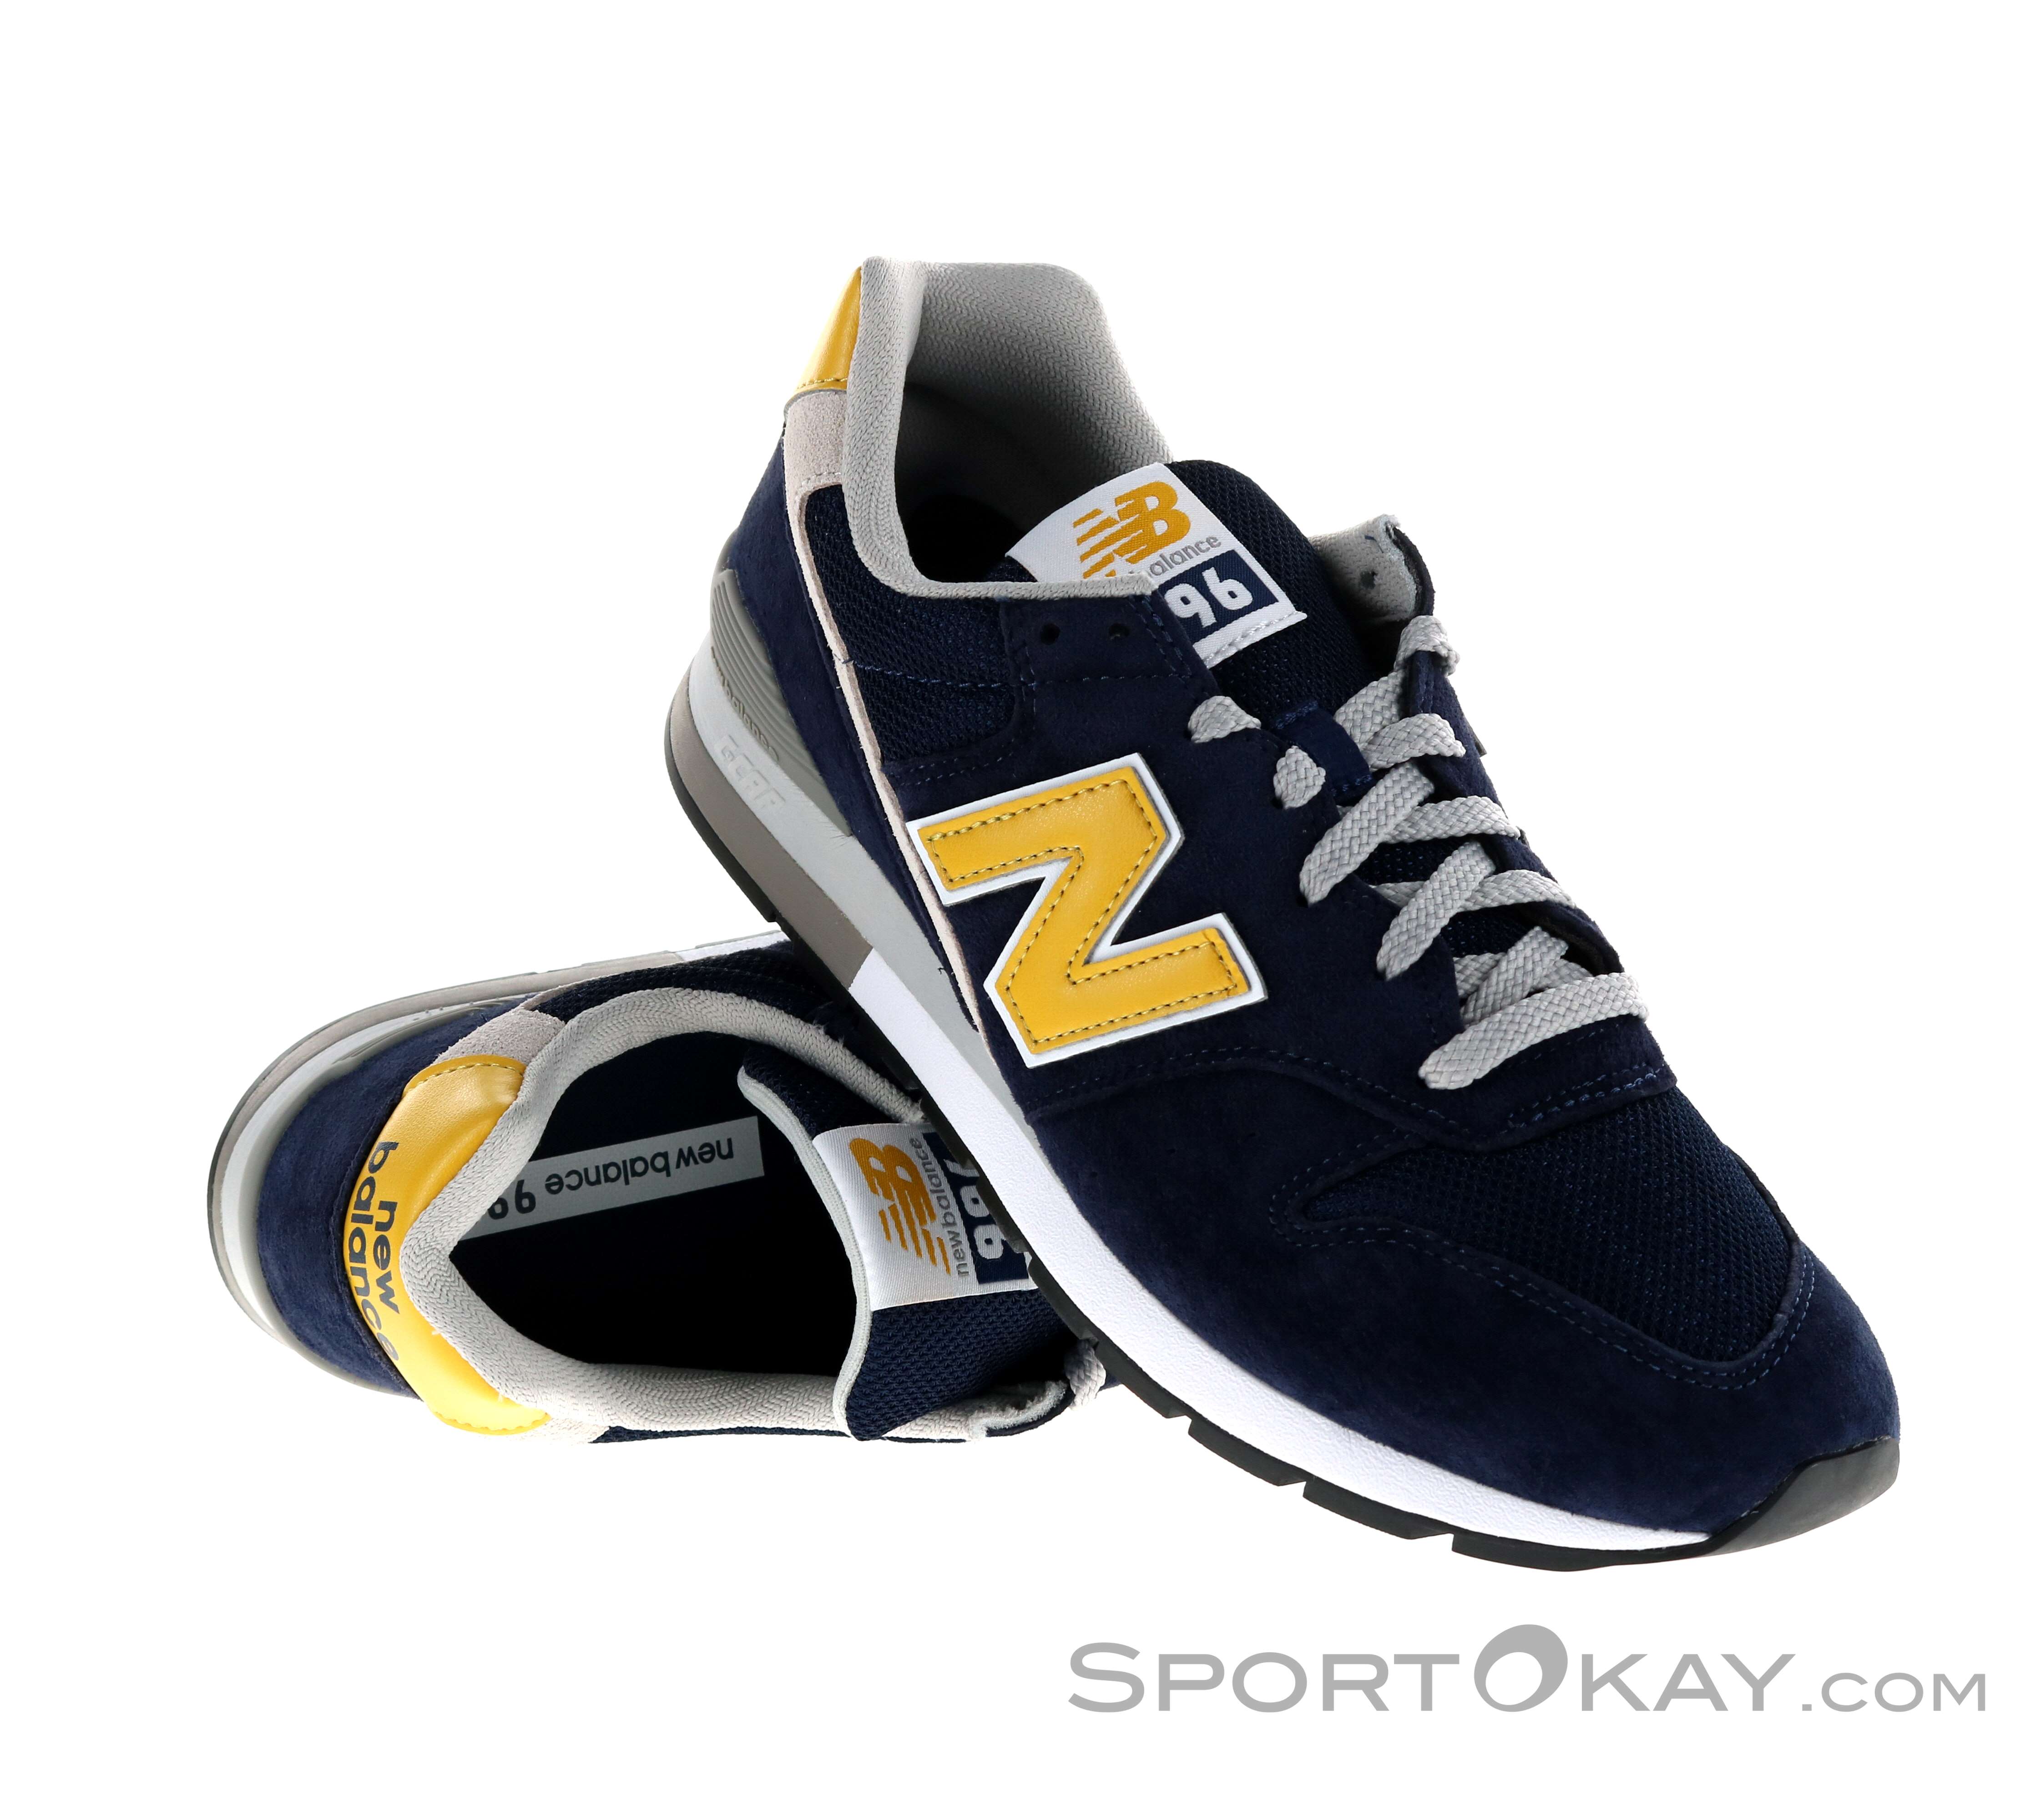 New Balance 996 Mens Leisure Shoes - Leisure Shoes - Shoes u0026 Poles -  Outdoor - All